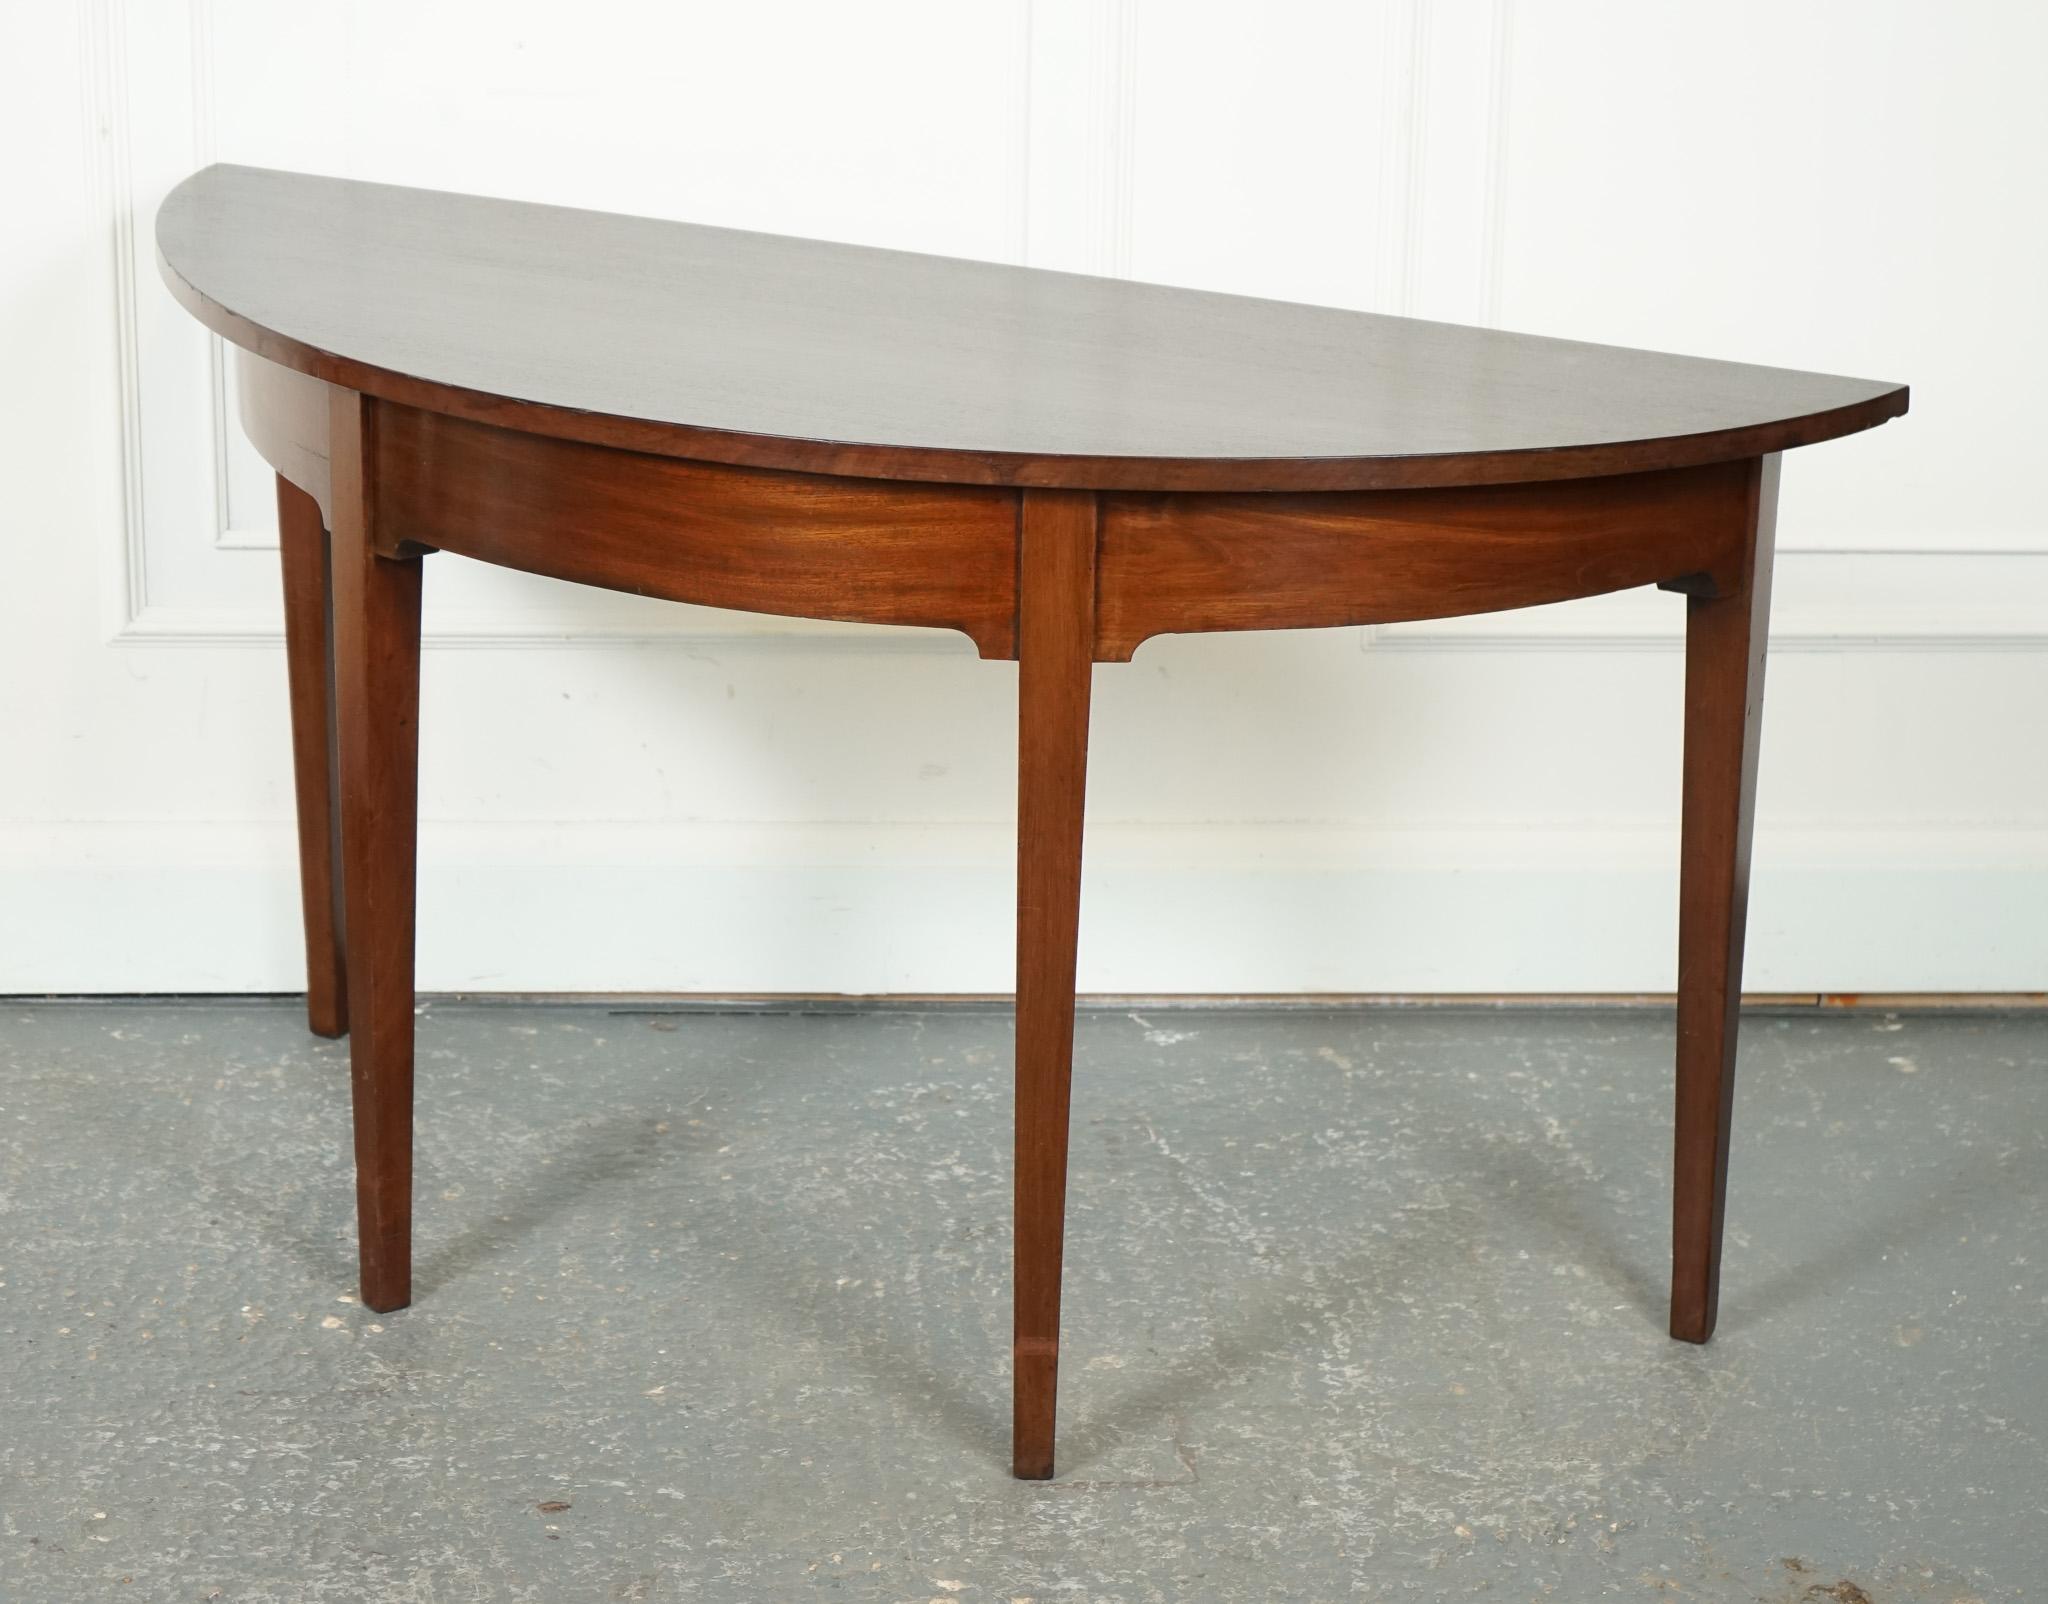 
We are delighted to offer for sale this Lovely George III Demi Lune Table.

This circa 1800 George III demi-lune hall side end table exudes an air of timeless elegance and sophistication. Crafted during the peak of the Georgian era, this piece